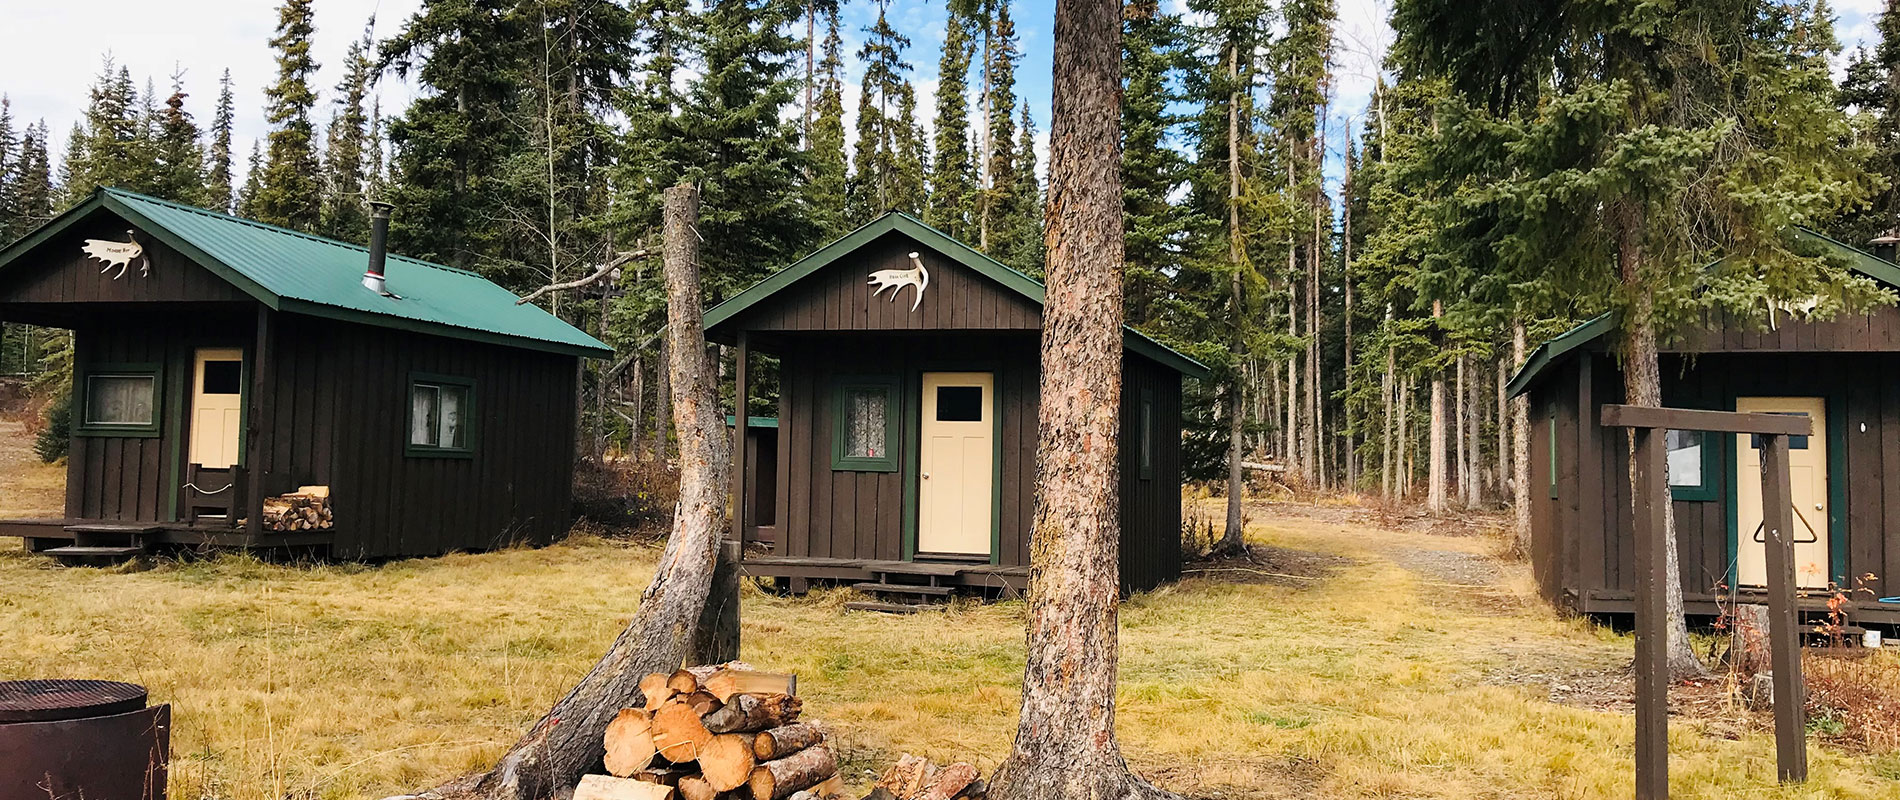 Copper River Outfitters Camp